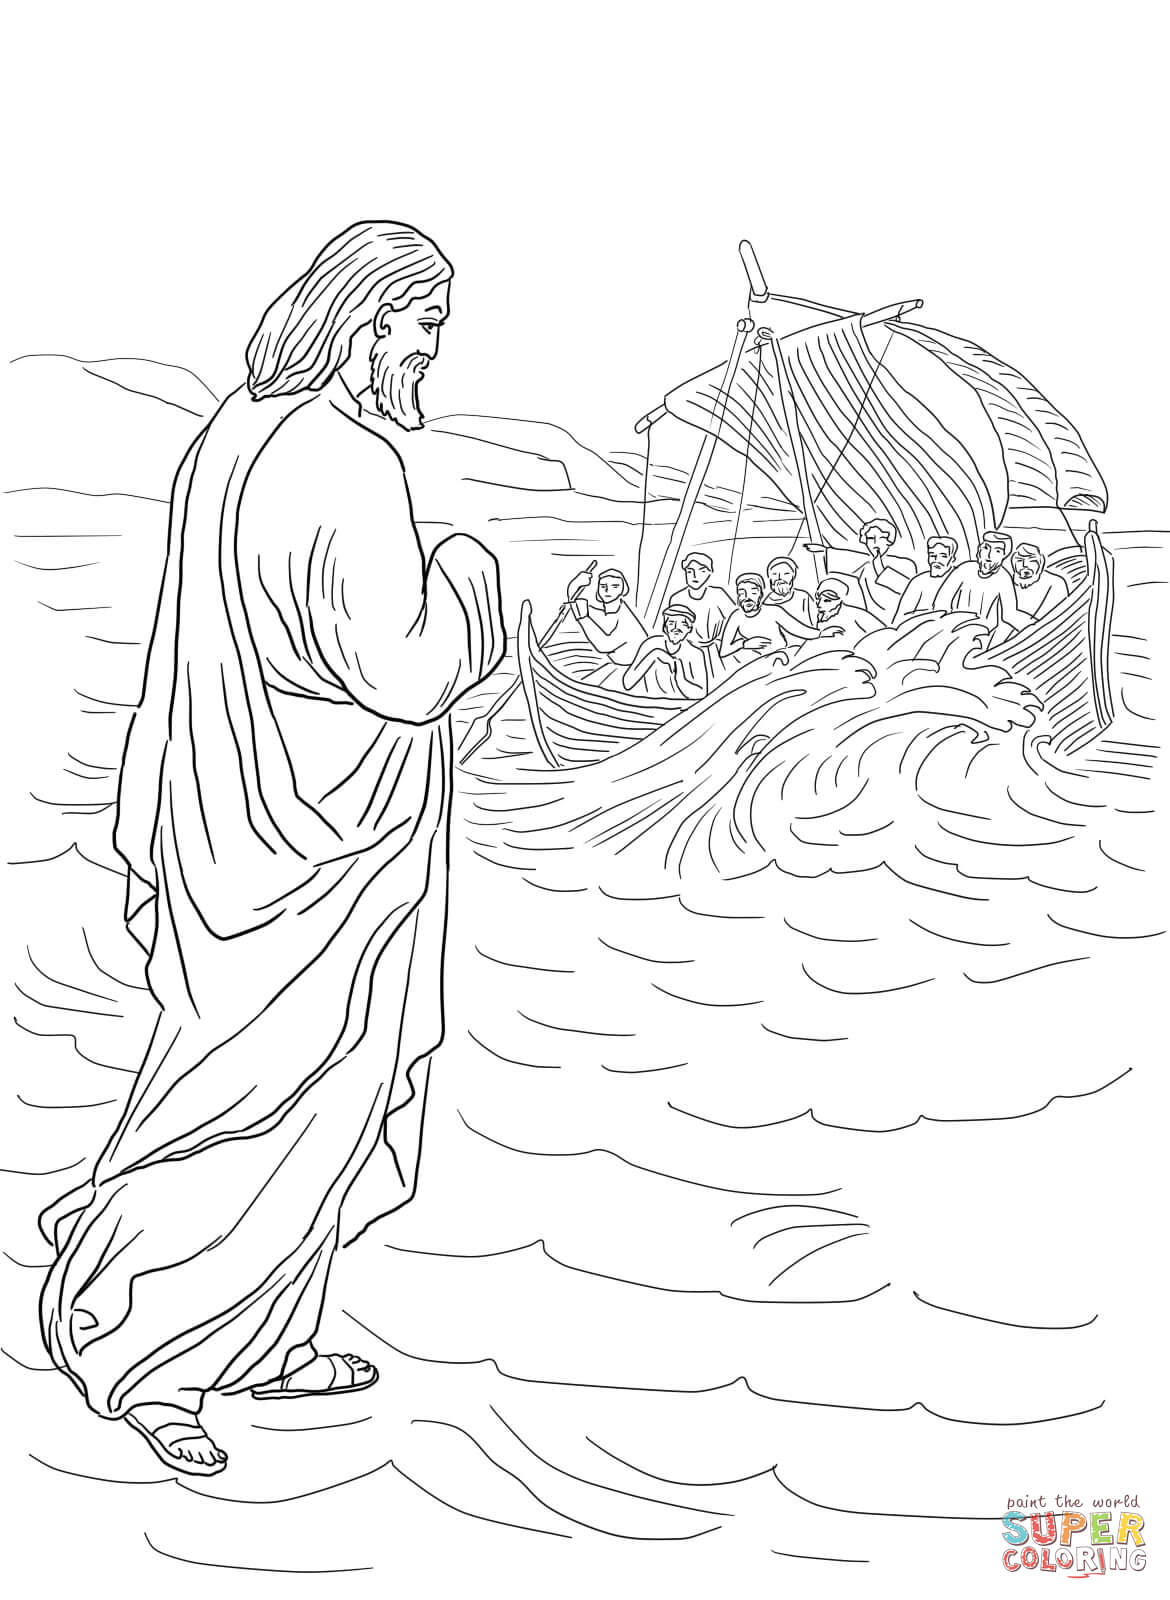 Jesus Walking on the Water coloring page | Free Printable Coloring Pages